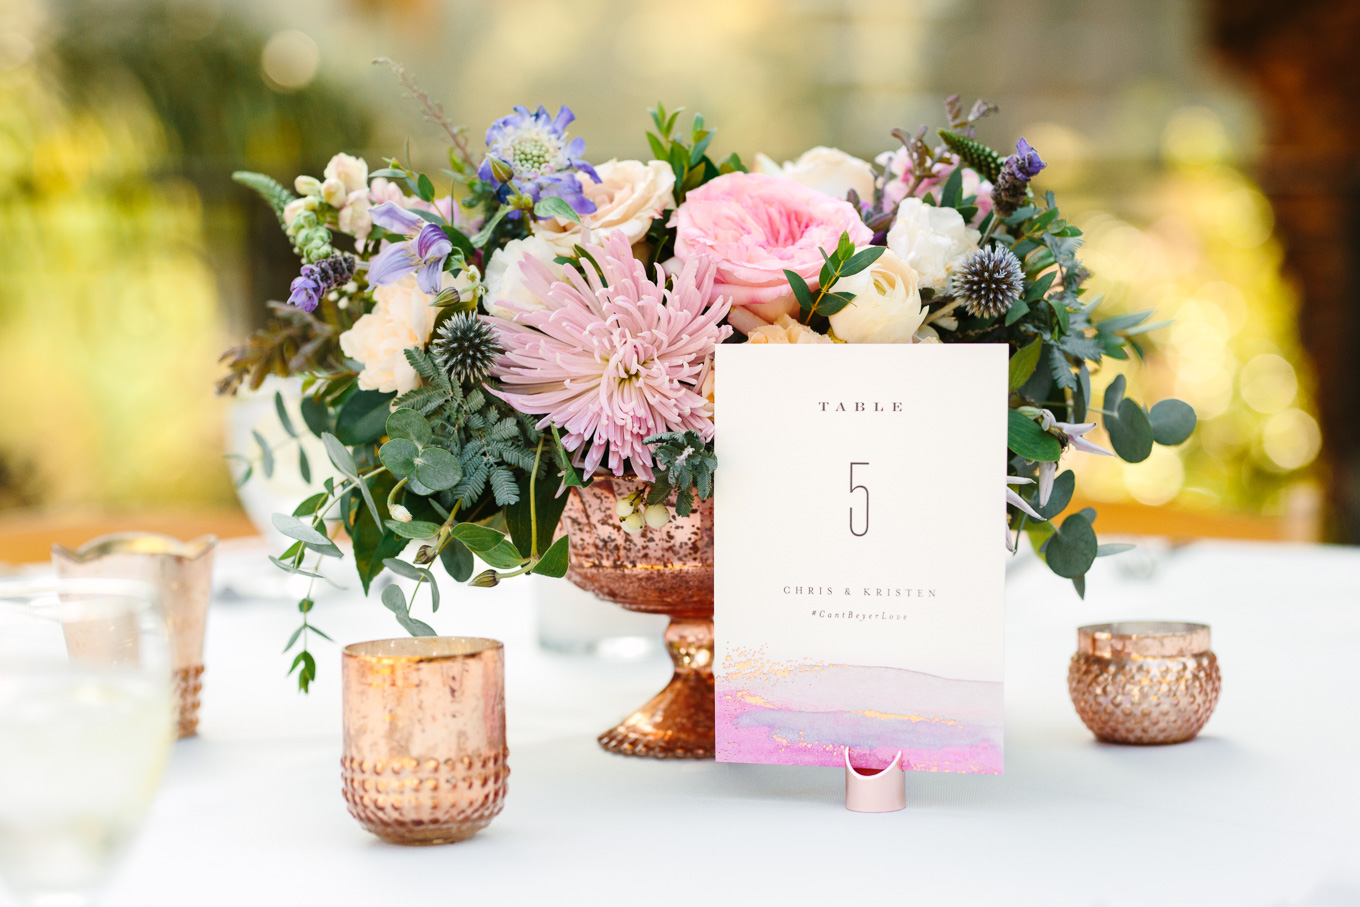 Lavender and pink reception table centerpiece at Houdini Estate in Hollywood, CA | Best Southern California Garden Wedding Venues | Colorful and elevated wedding photography for fun-loving couples | #gardenvenue #weddingvenue #socalweddingvenue #bouquetideas #uniquebouquet   Source: Mary Costa Photography | Los Angeles 